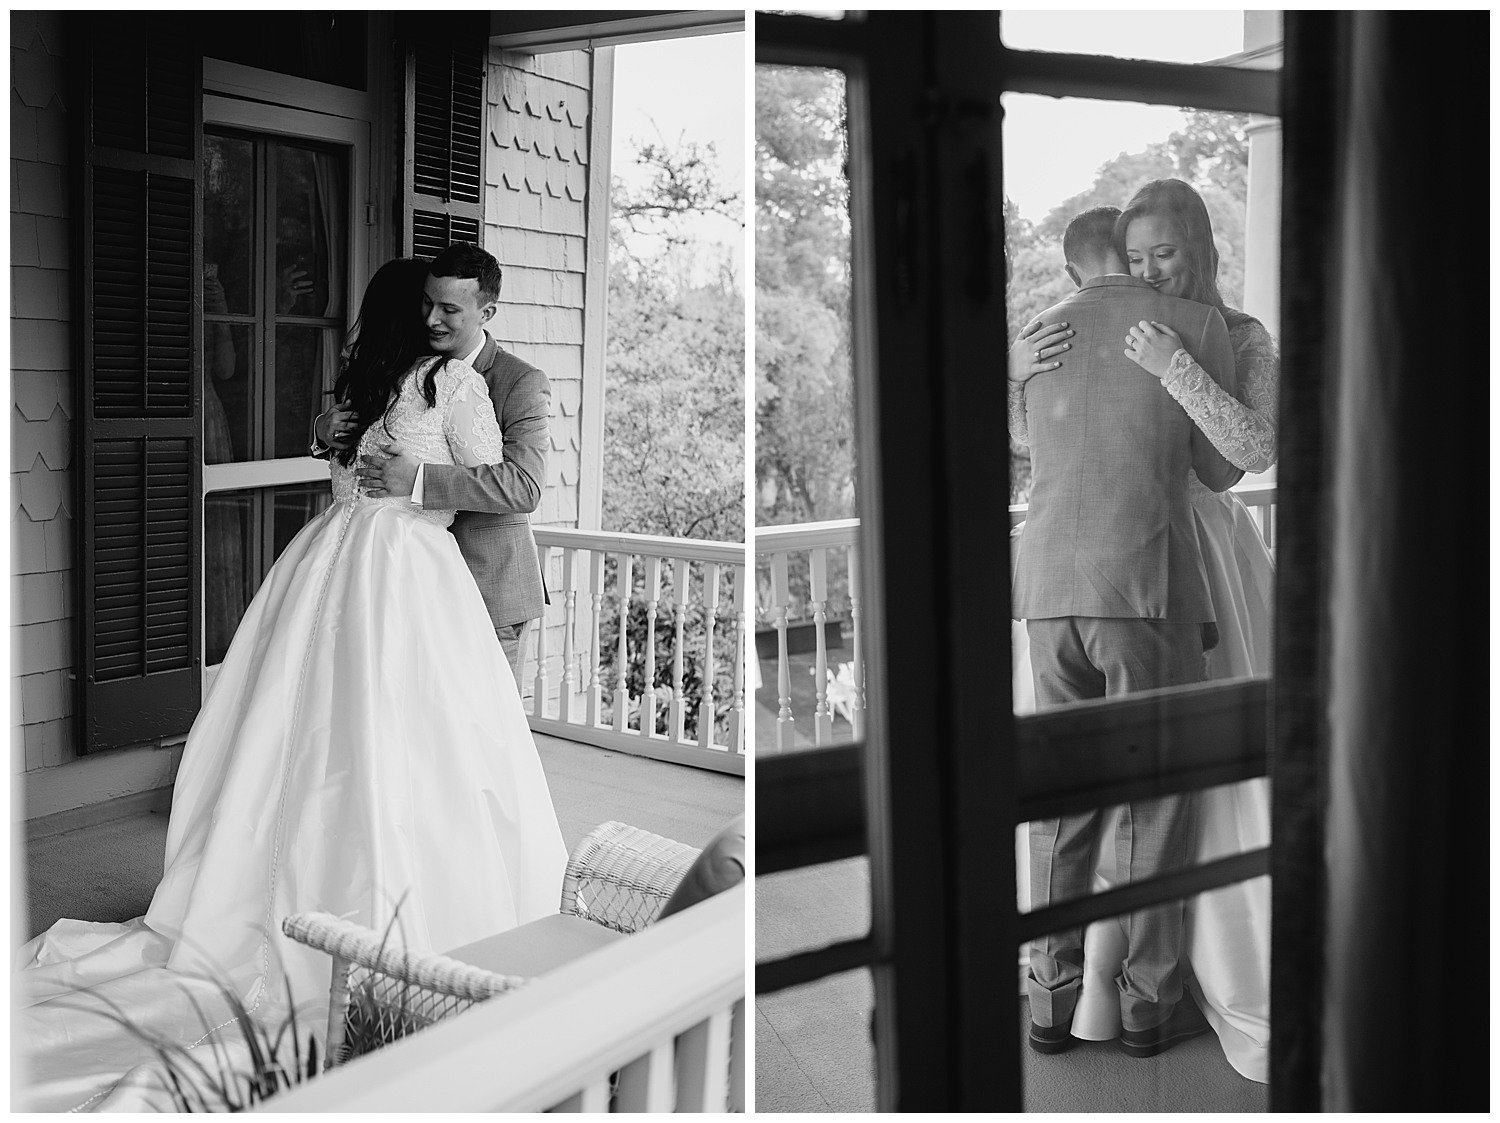 Two vertical shot showing opposing views as the bride and groom hug during the first look